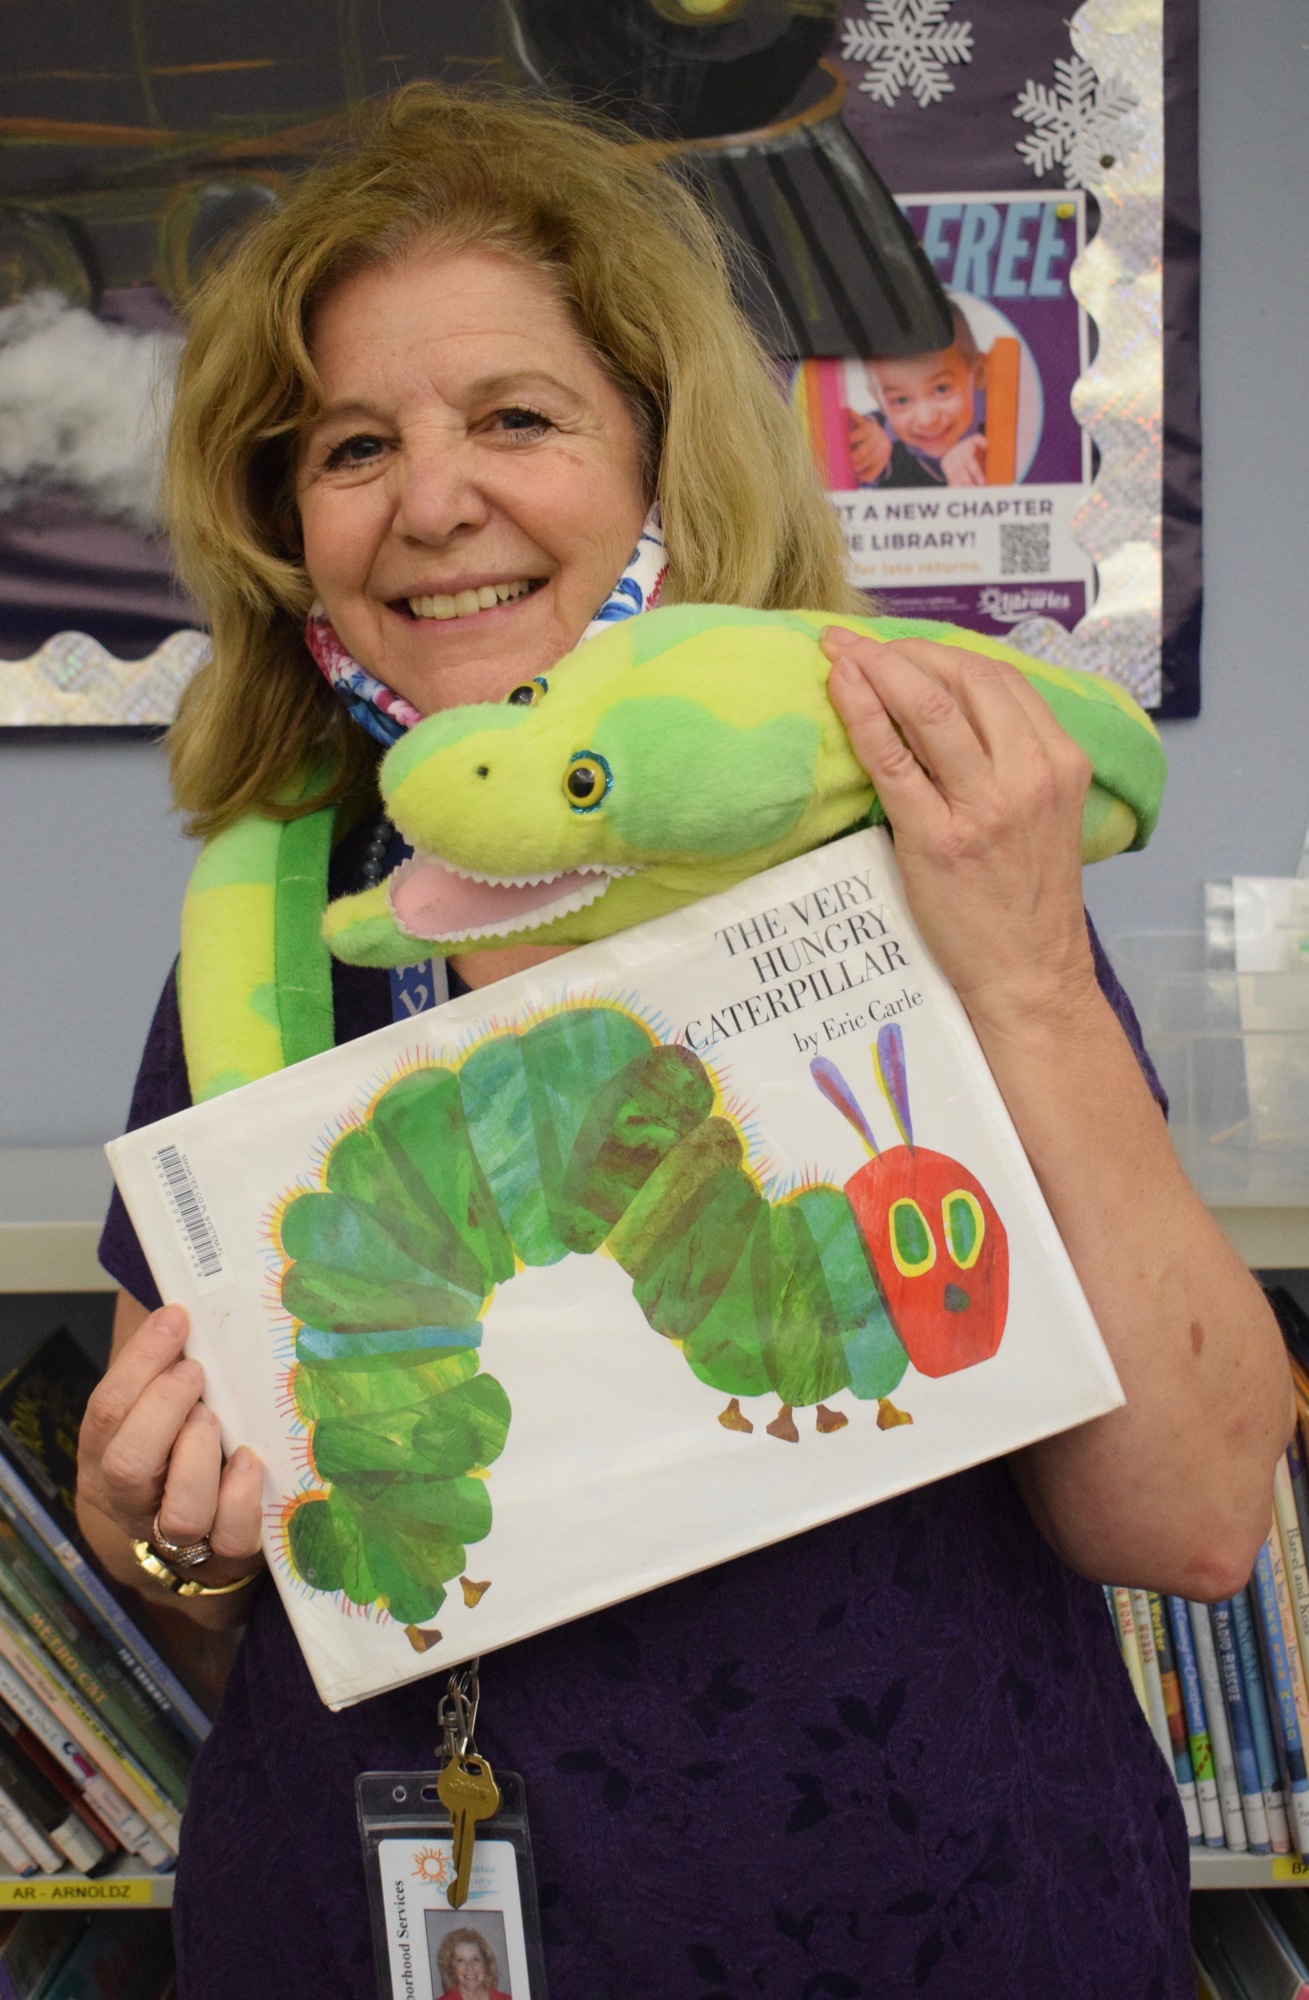 Christine Culp, the youth services librarian at the Braden River Library, wants to incorporate more of her puppets into her storytime videos much like she would during in-person storytimes.